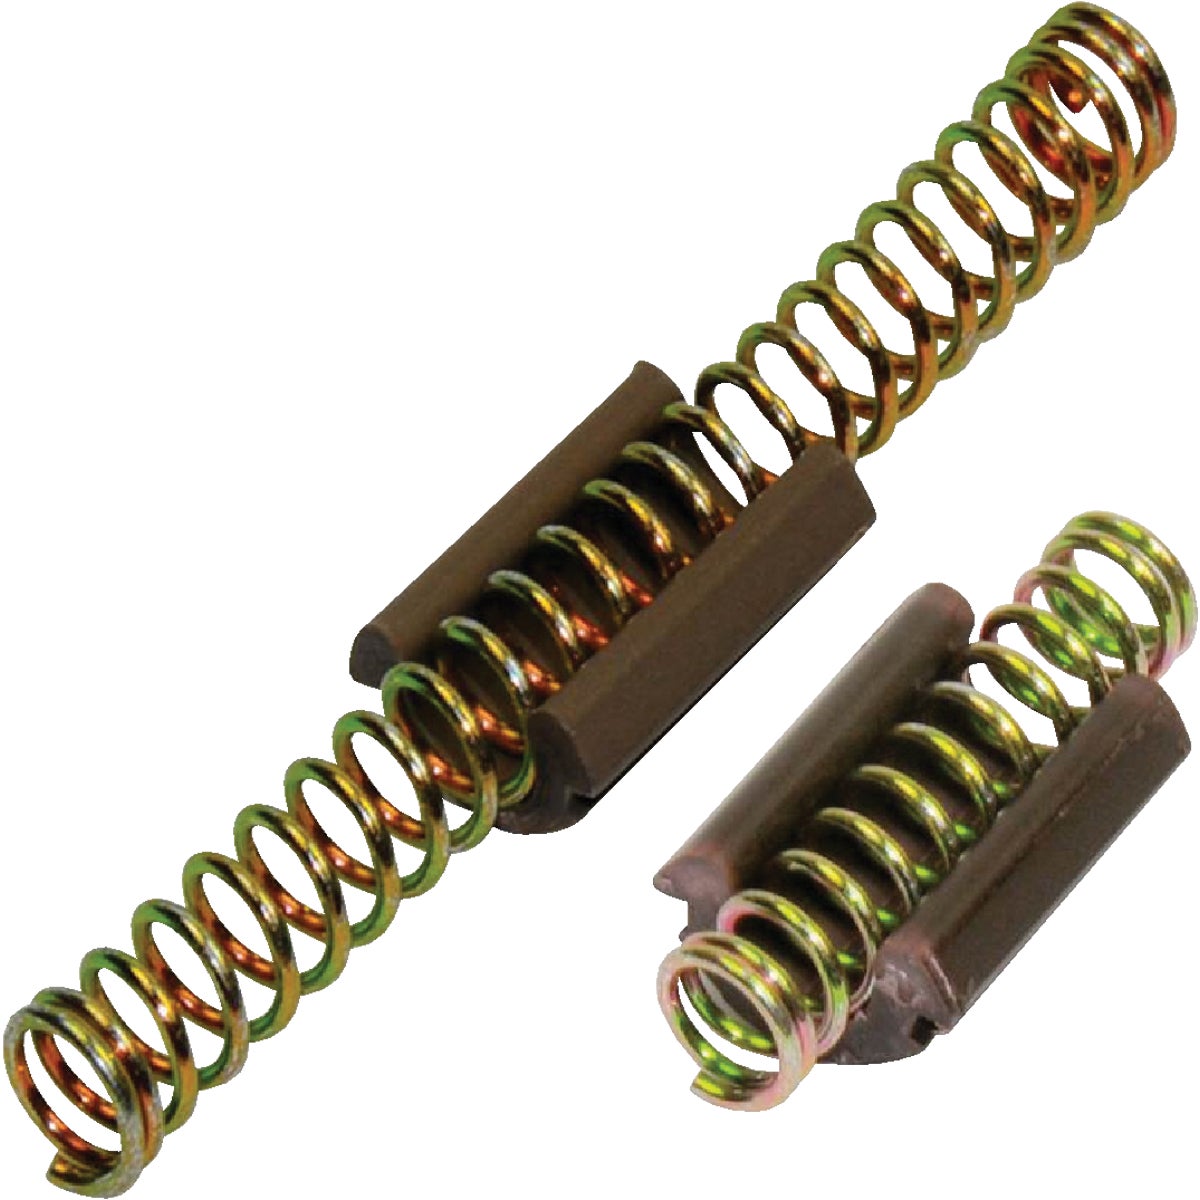 Item 243043, Universal spring snubber is a replacement stop for all tap-in type bi-fold 